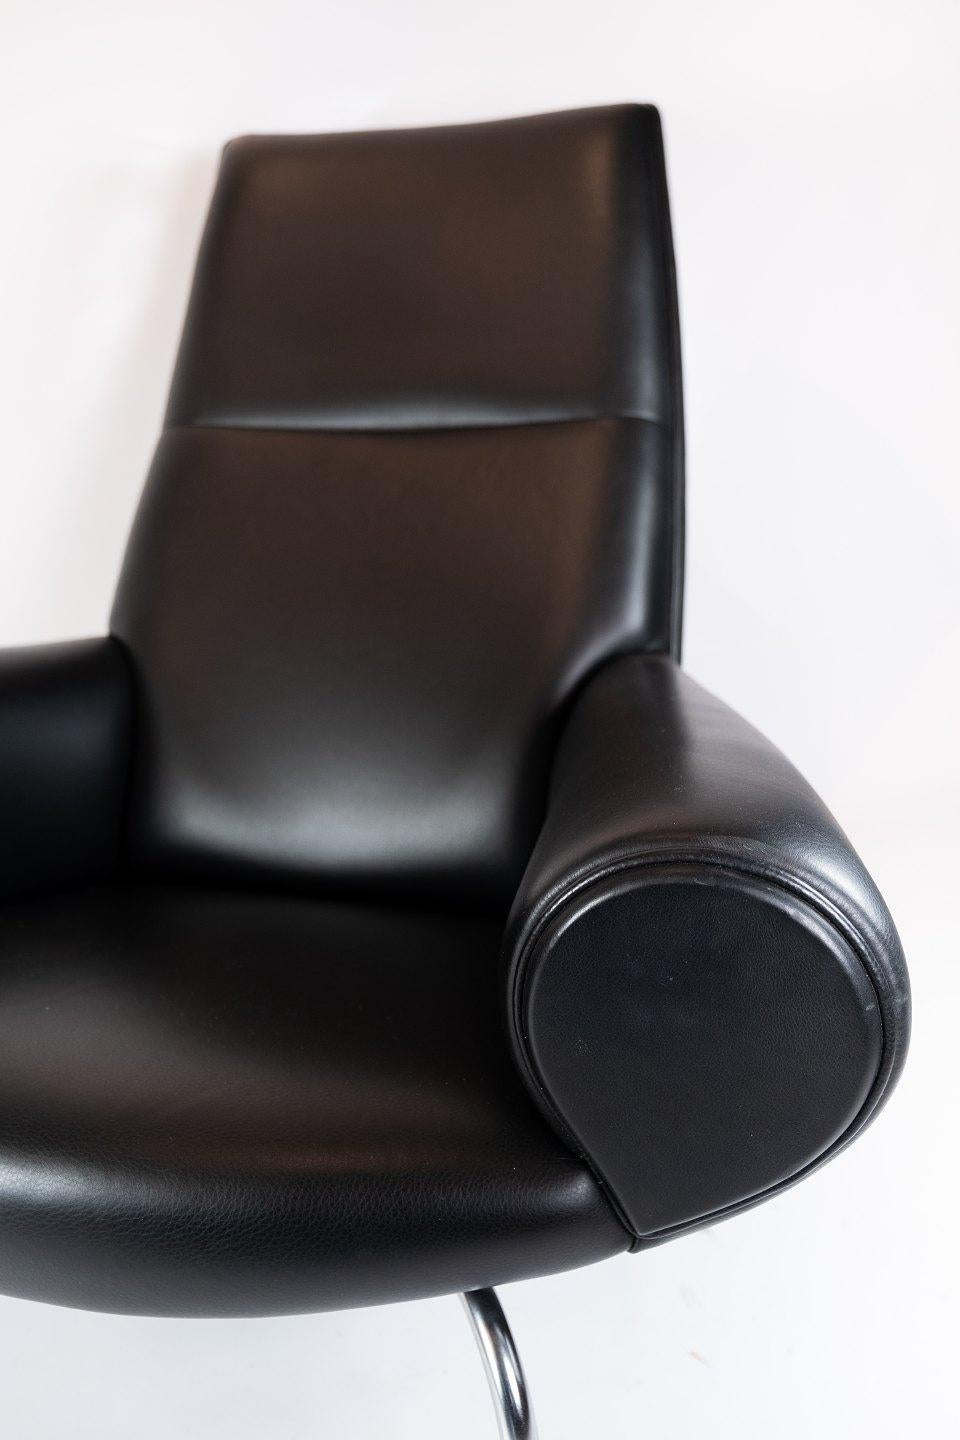 The queen chair, model EJ 101, designed by Hans J. Wegner and manufactured by Erik Jørgensen. The chair is upholstered with black leather and in great used condition.
  